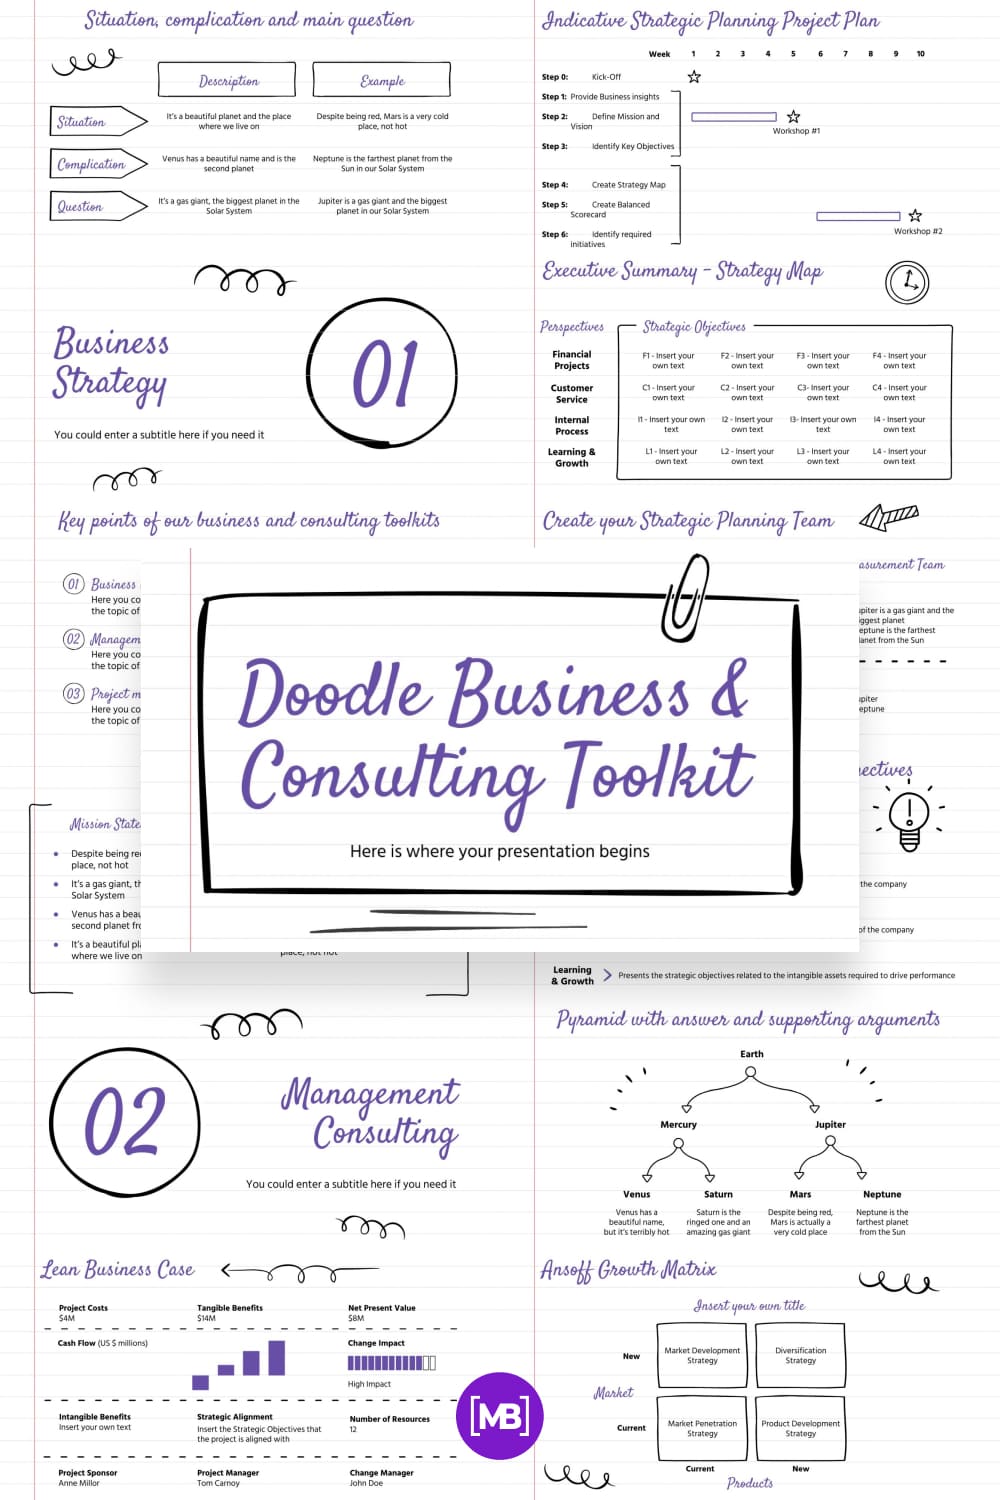 Doodle business and consulting toolkit.